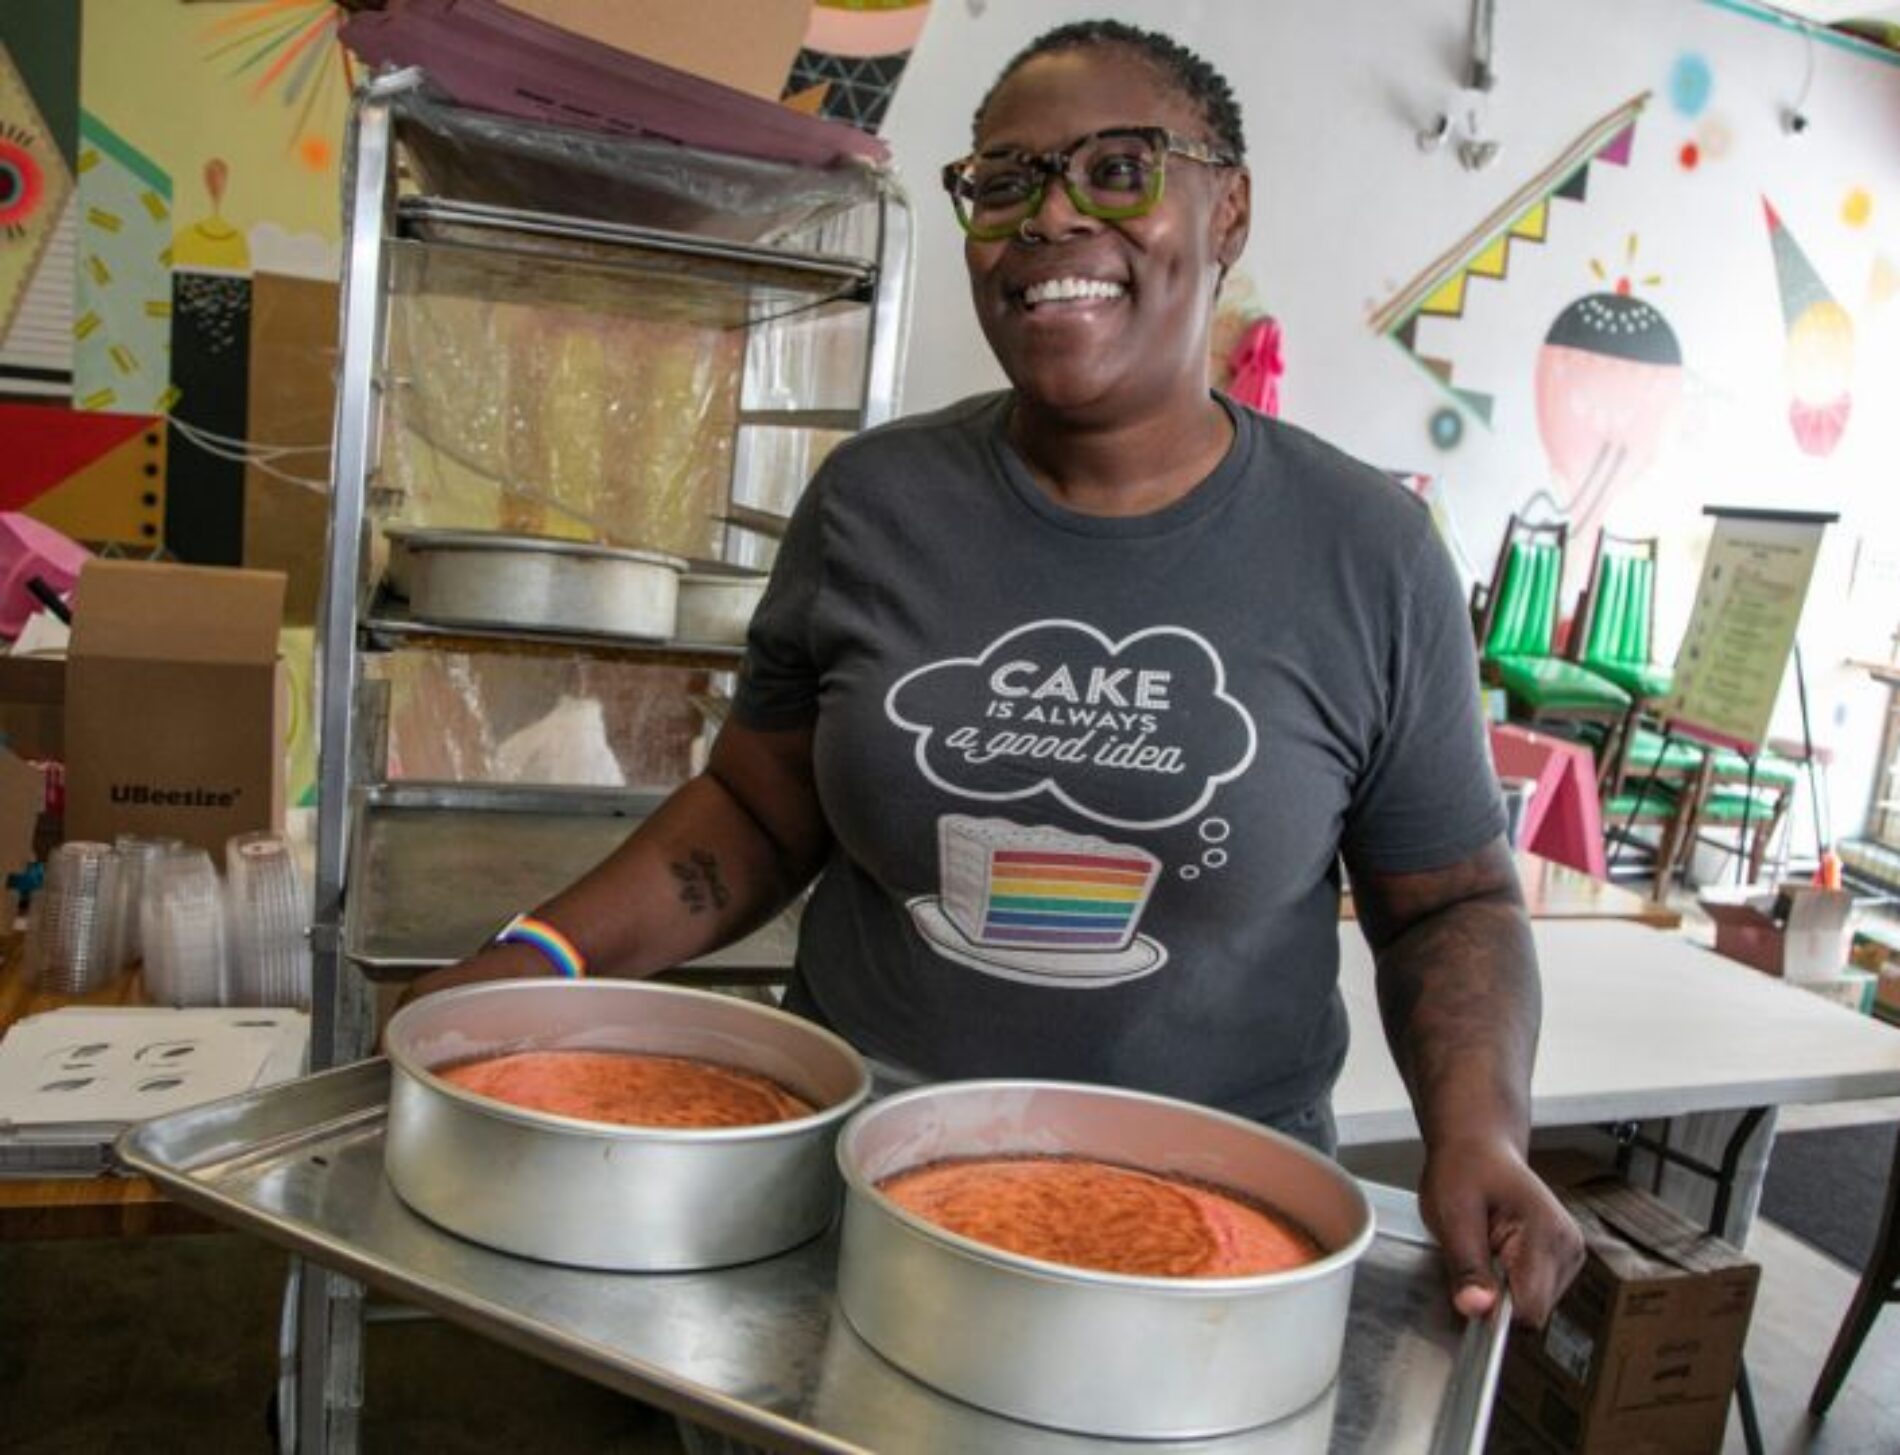 A Lesbian Baker Got A Homophobic Cake Order. And She Made It Anyway